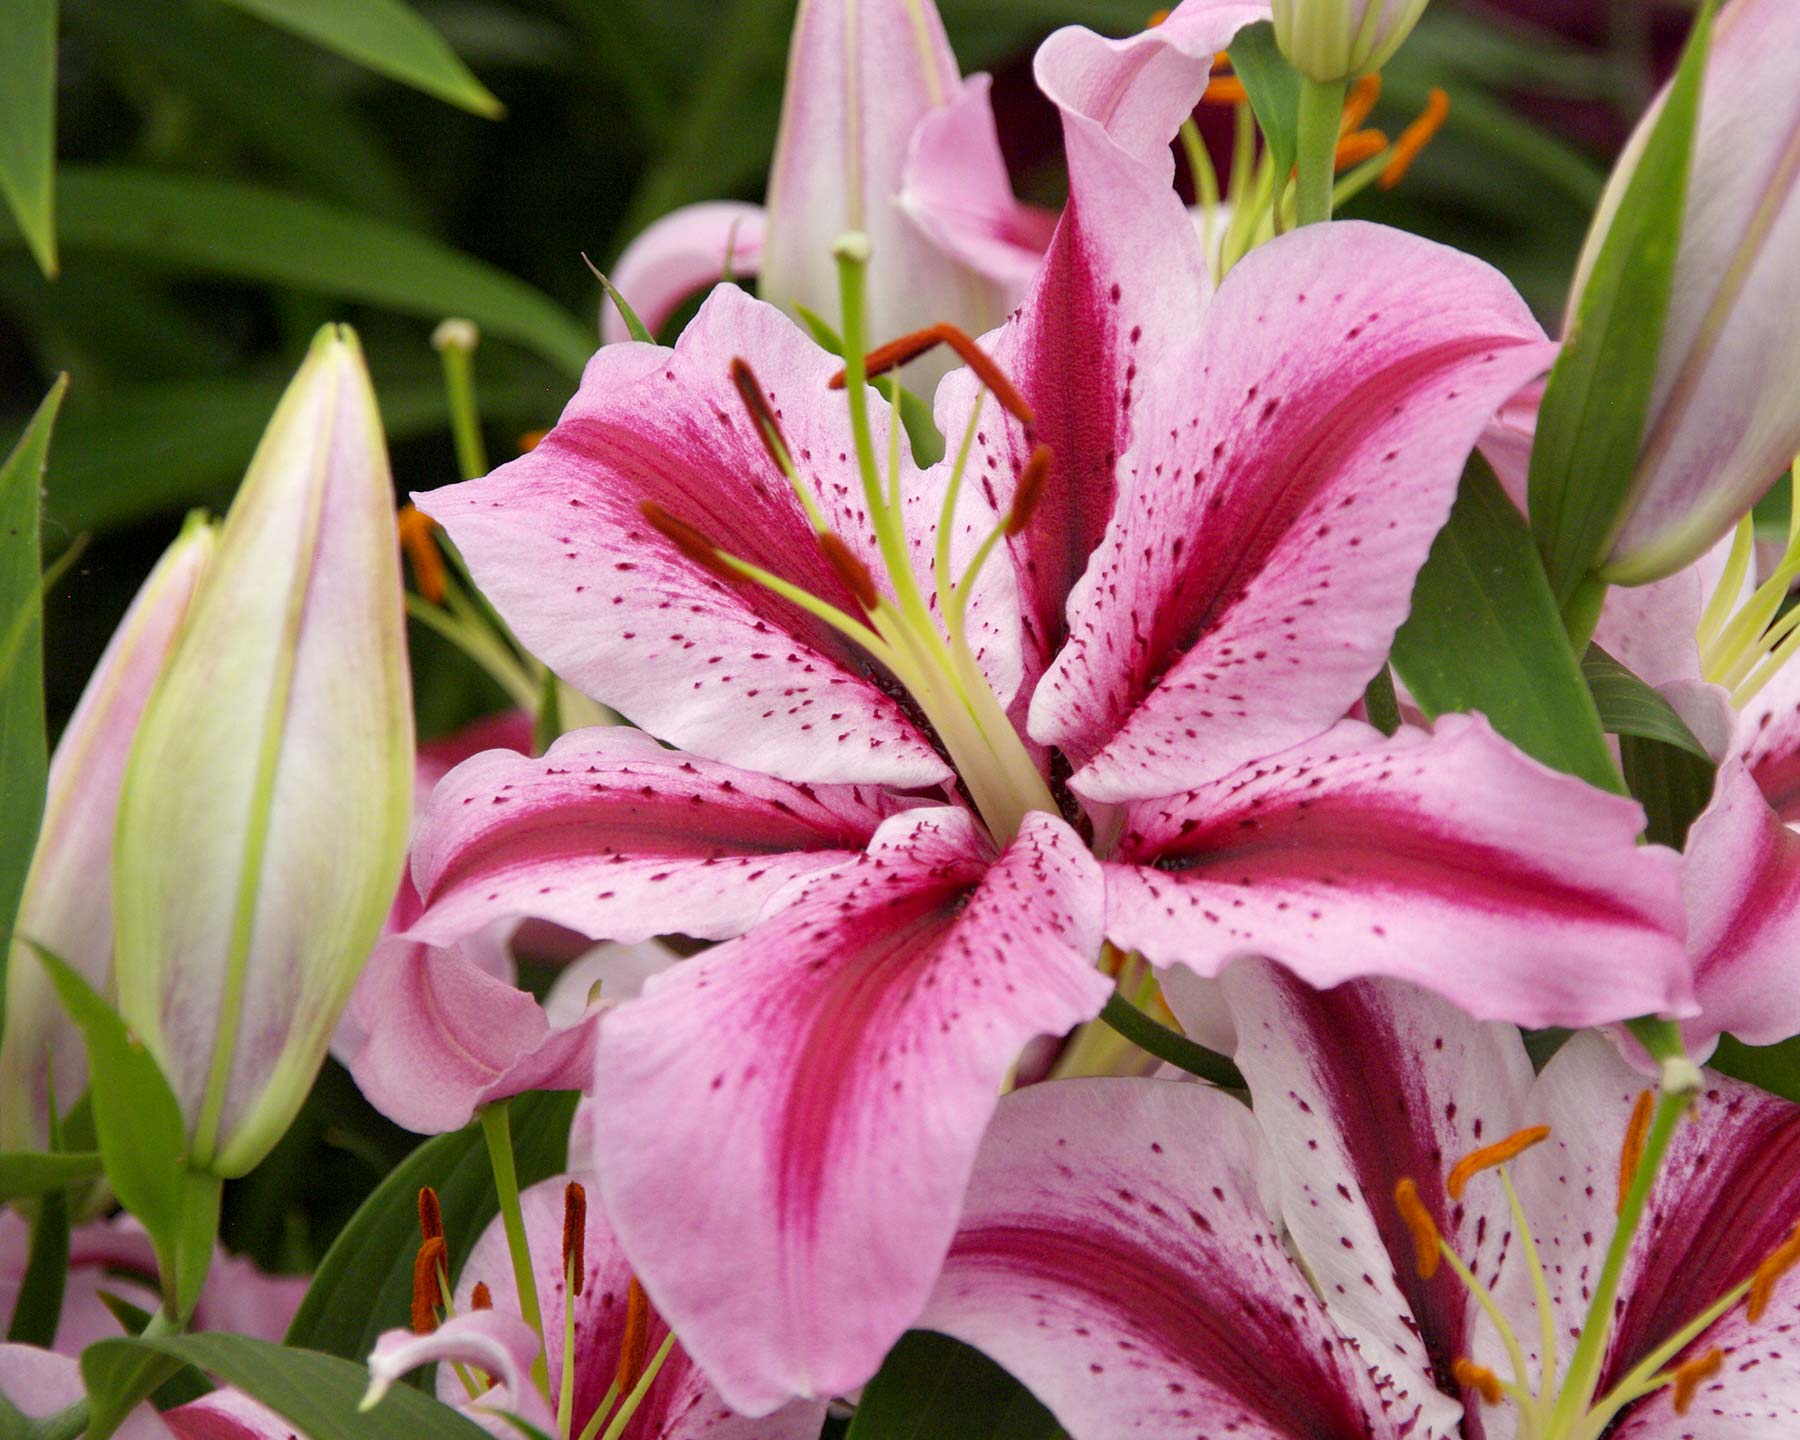 Lilium Oriental hybrid Jaybird - large bowl shaped flower - pink with deep pink central band and deep pink spots